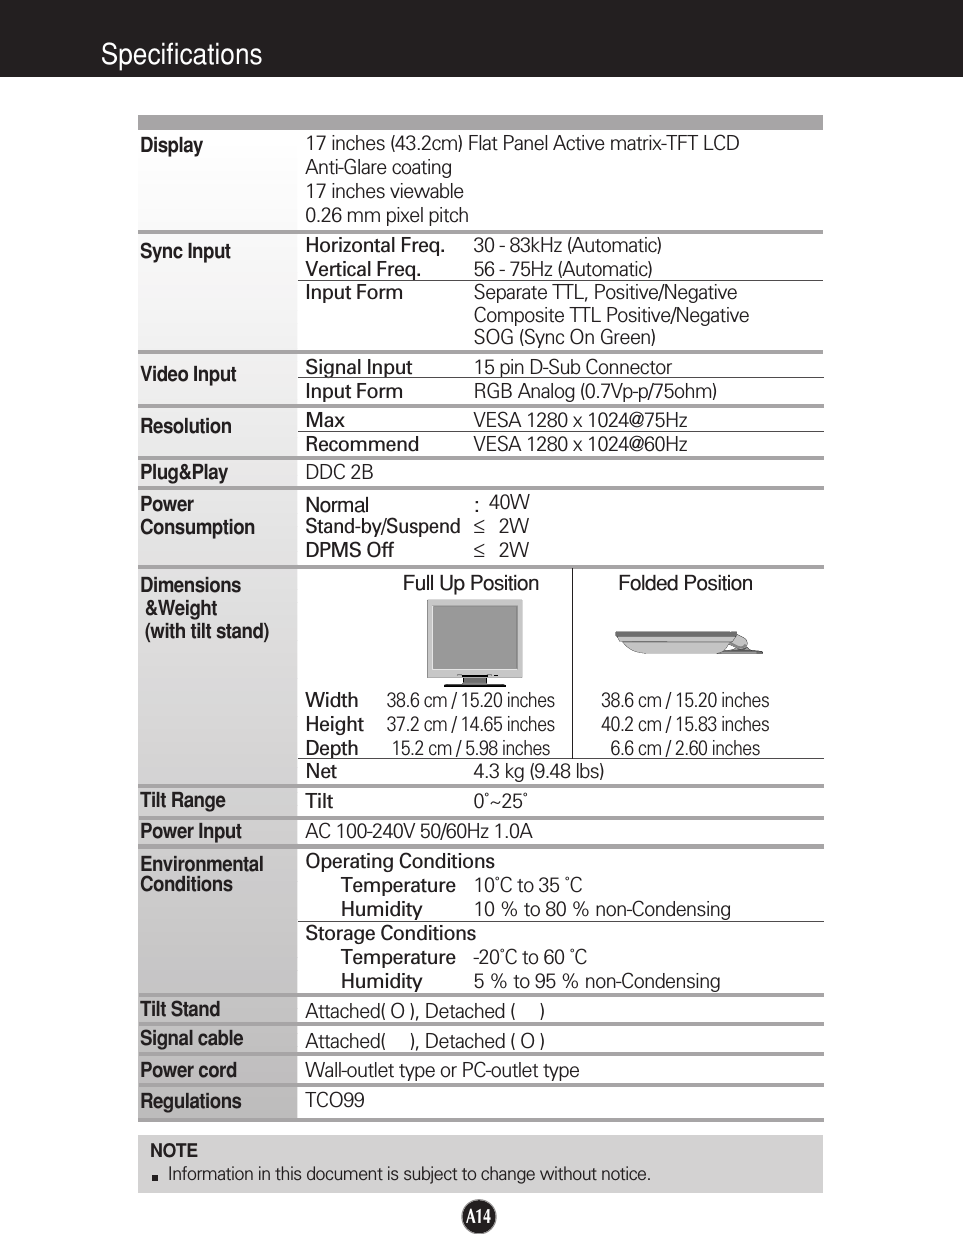 A14SpecificationsNOTEInformation in this document is subject to change without notice.17 inches (43.2cm) Flat Panel Active matrix-TFT LCD Anti-Glare coating17 inches viewable0.26 mm pixel pitchHorizontal Freq. 30 - 83kHz (Automatic)Vertical Freq. 56 - 75Hz (Automatic)Input Form Separate TTL, Positive/NegativeComposite TTL Positive/NegativeSOG (Sync On Green) Signal Input 15 pin D-Sub ConnectorInput Form RGB Analog (0.7Vp-p/75ohm)Max VESA 1280 x 1024@75Hz Recommend VESA 1280 x 1024@60HzDDC 2BNormal : 40WStand-by/Suspend≤2WDPMS Off ≤2WFull Up Position Folded PositionWidth38.6 cm / 15.20 inches 38.6 cm / 15.20 inchesHeight37.2 cm / 14.65 inches 40.2 cm / 15.83 inchesDepth15.2 cm / 5.98 inches 6.6 cm / 2.60 inchesNet 4.3 kg (9.48 lbs)Tilt 0˚~25˚AC 100-240V 50/60Hz 1.0AOperating ConditionsTemperature 10˚C to 35 ˚CHumidity 10 % to 80 % non-CondensingStorage ConditionsTemperature -20˚C to 60 ˚CHumidity 5 % to 95 % non-CondensingAttached( O ), Detached (     )Attached(     ), Detached ( O )Wall-outlet type or PC-outlet typeTCO99DisplaySync InputVideo InputResolutionPlug&amp;PlayPowerConsumptionDimensions&amp;Weight(with tilt stand)Tilt RangePower InputEnvironmentalConditionsTilt StandSignal cablePower cord Regulations